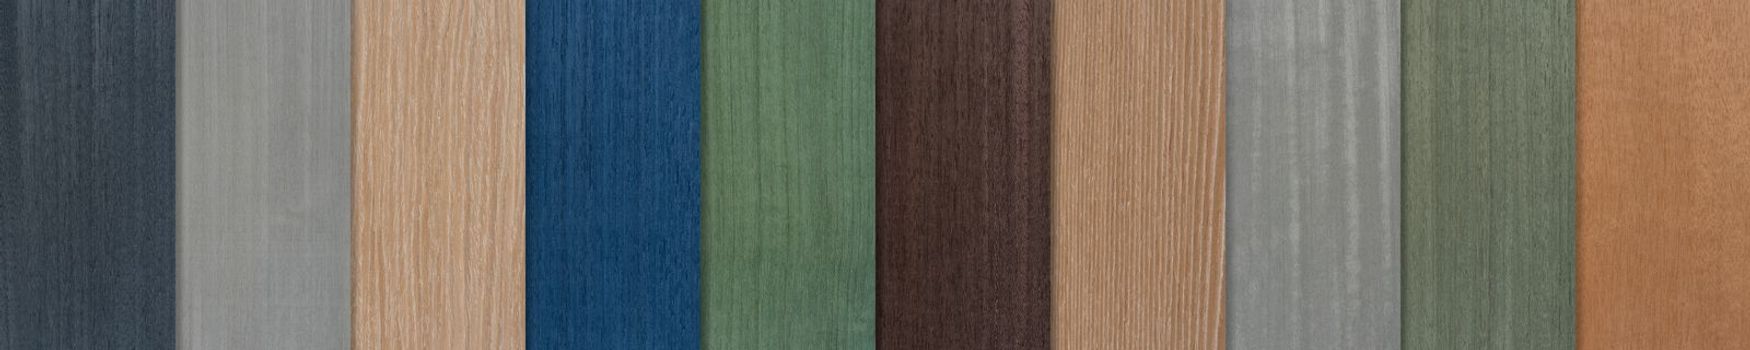 Samples of wood of different species. Pieces of exotic wood veneer in different shades and textures. Samples of wood for the production of floor furniture or doors, top view